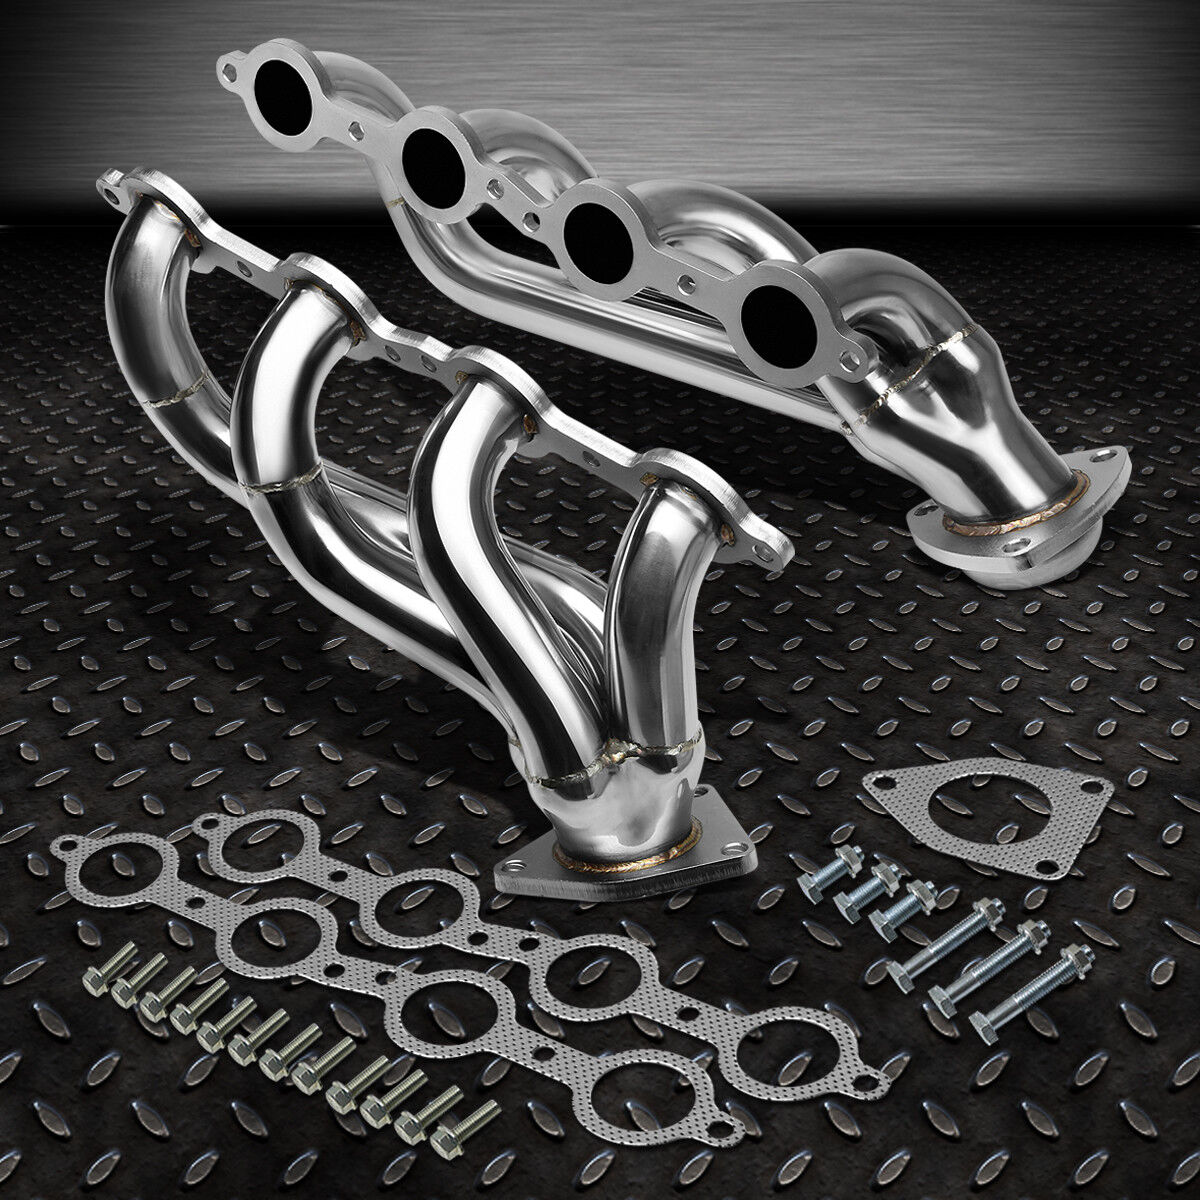 FOR 02-16 CHEVY SILVERADO 1500 2500HD 3500HD STAINLESS EXHAUST HEADER